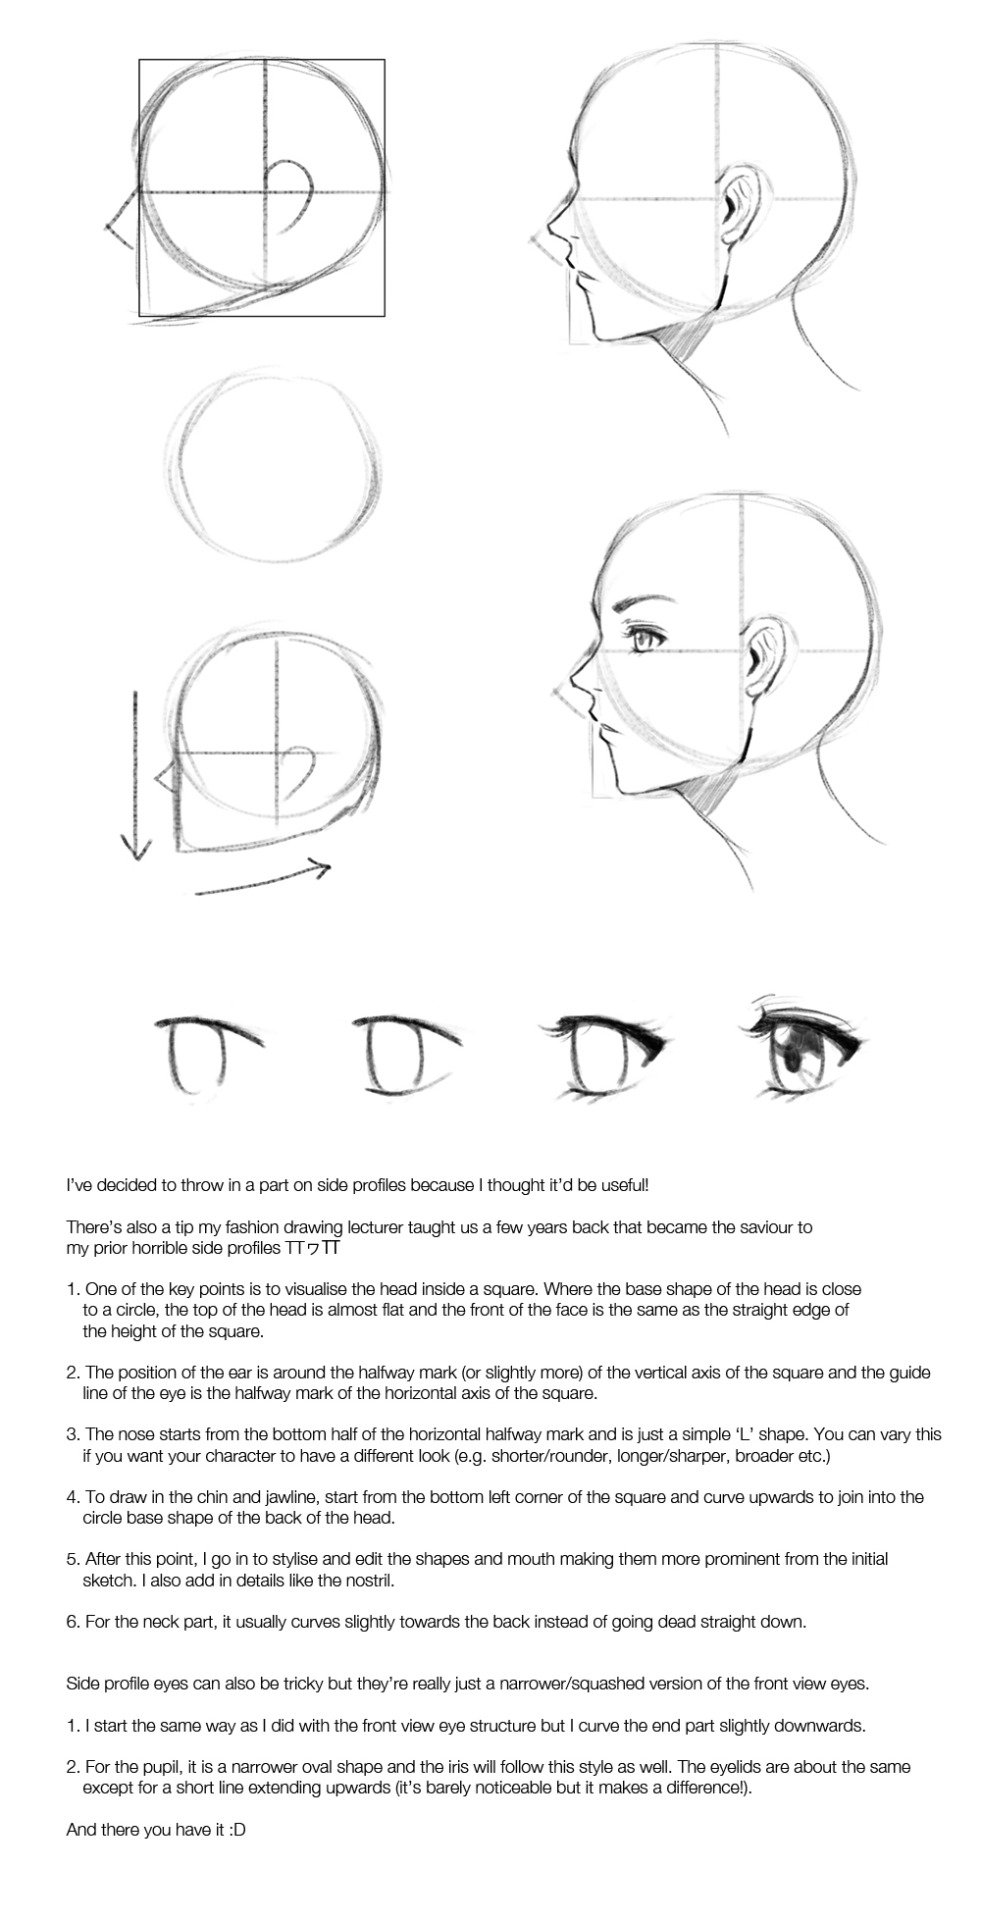 How To Draw Faces Tumblr